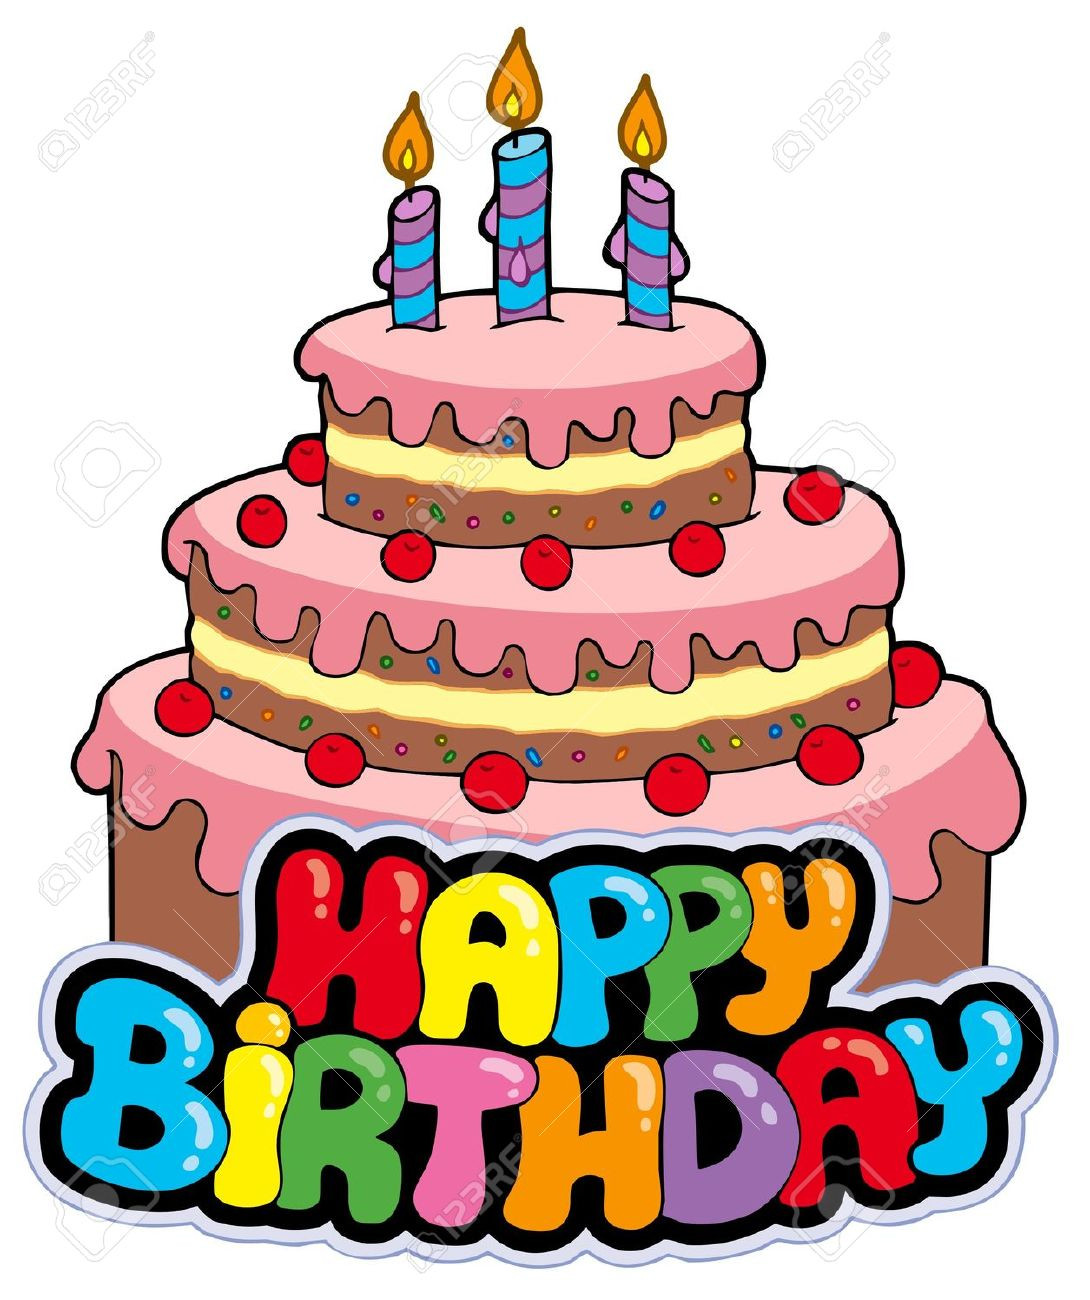 Birthday Cake Graphic
 Cake clipart on glitter graphics birthday cakes and image